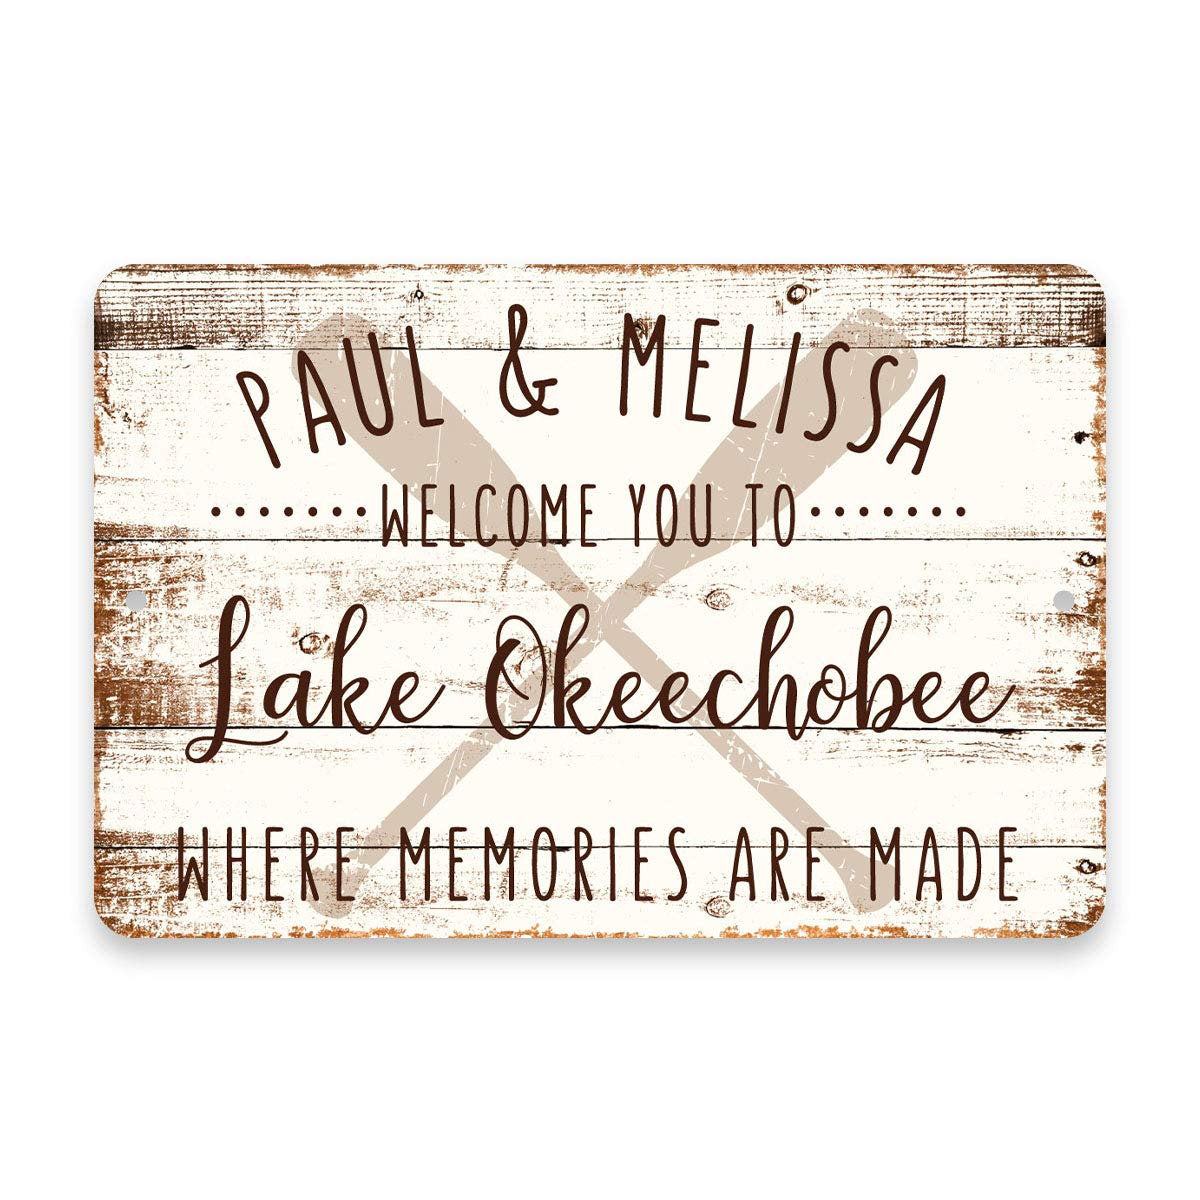 Personalized Welcome to Lake Okeechobee Where Memories are Made Sign - 8 X 12 Metal Sign with Wood Look